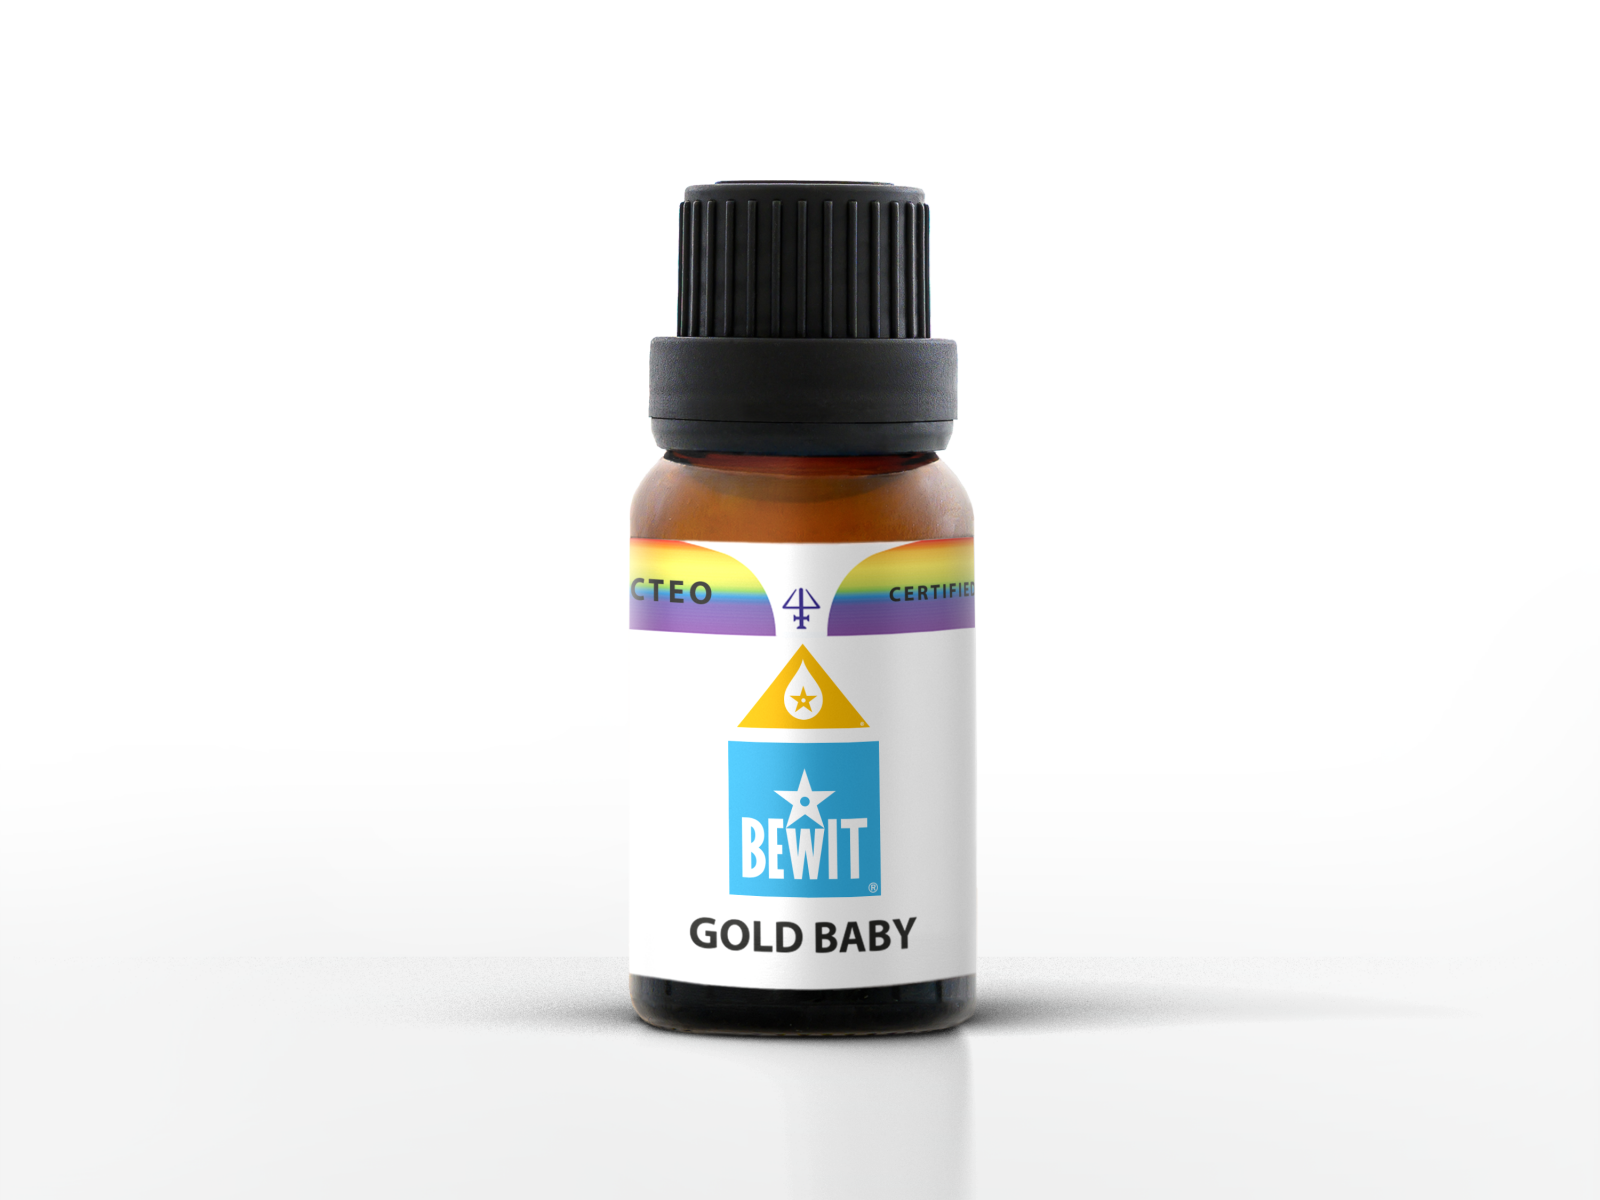 BEWIT GOLD BABY - Blend of essential oils